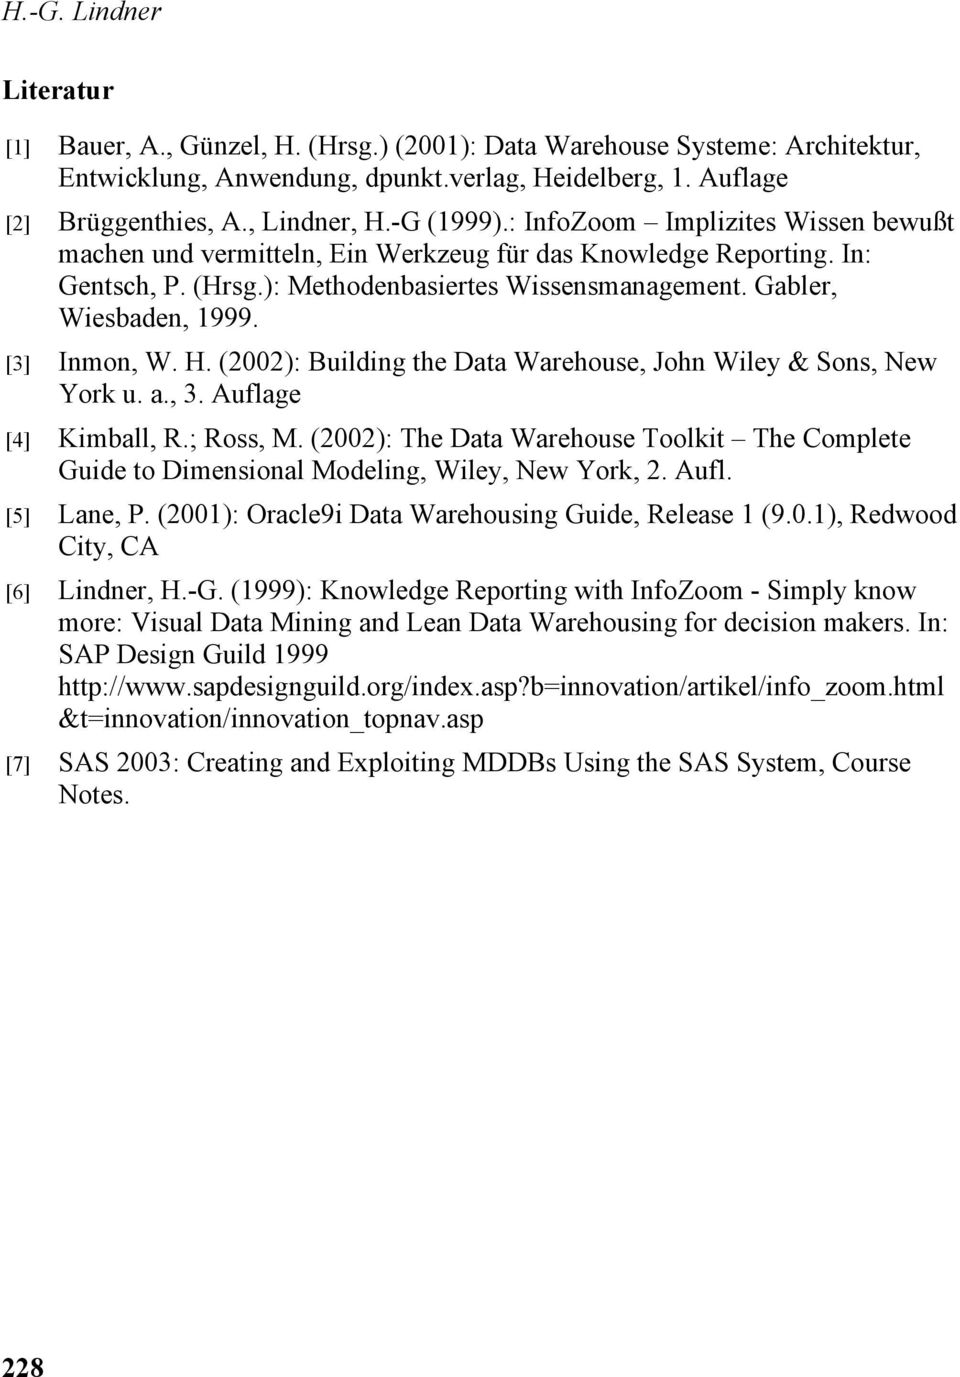 [3] Inmon, W. H. (2002): Building the Data Warehouse, John Wiley & Sons, New York u. a., 3. Auflage [4] Kimball, R.; Ross, M.